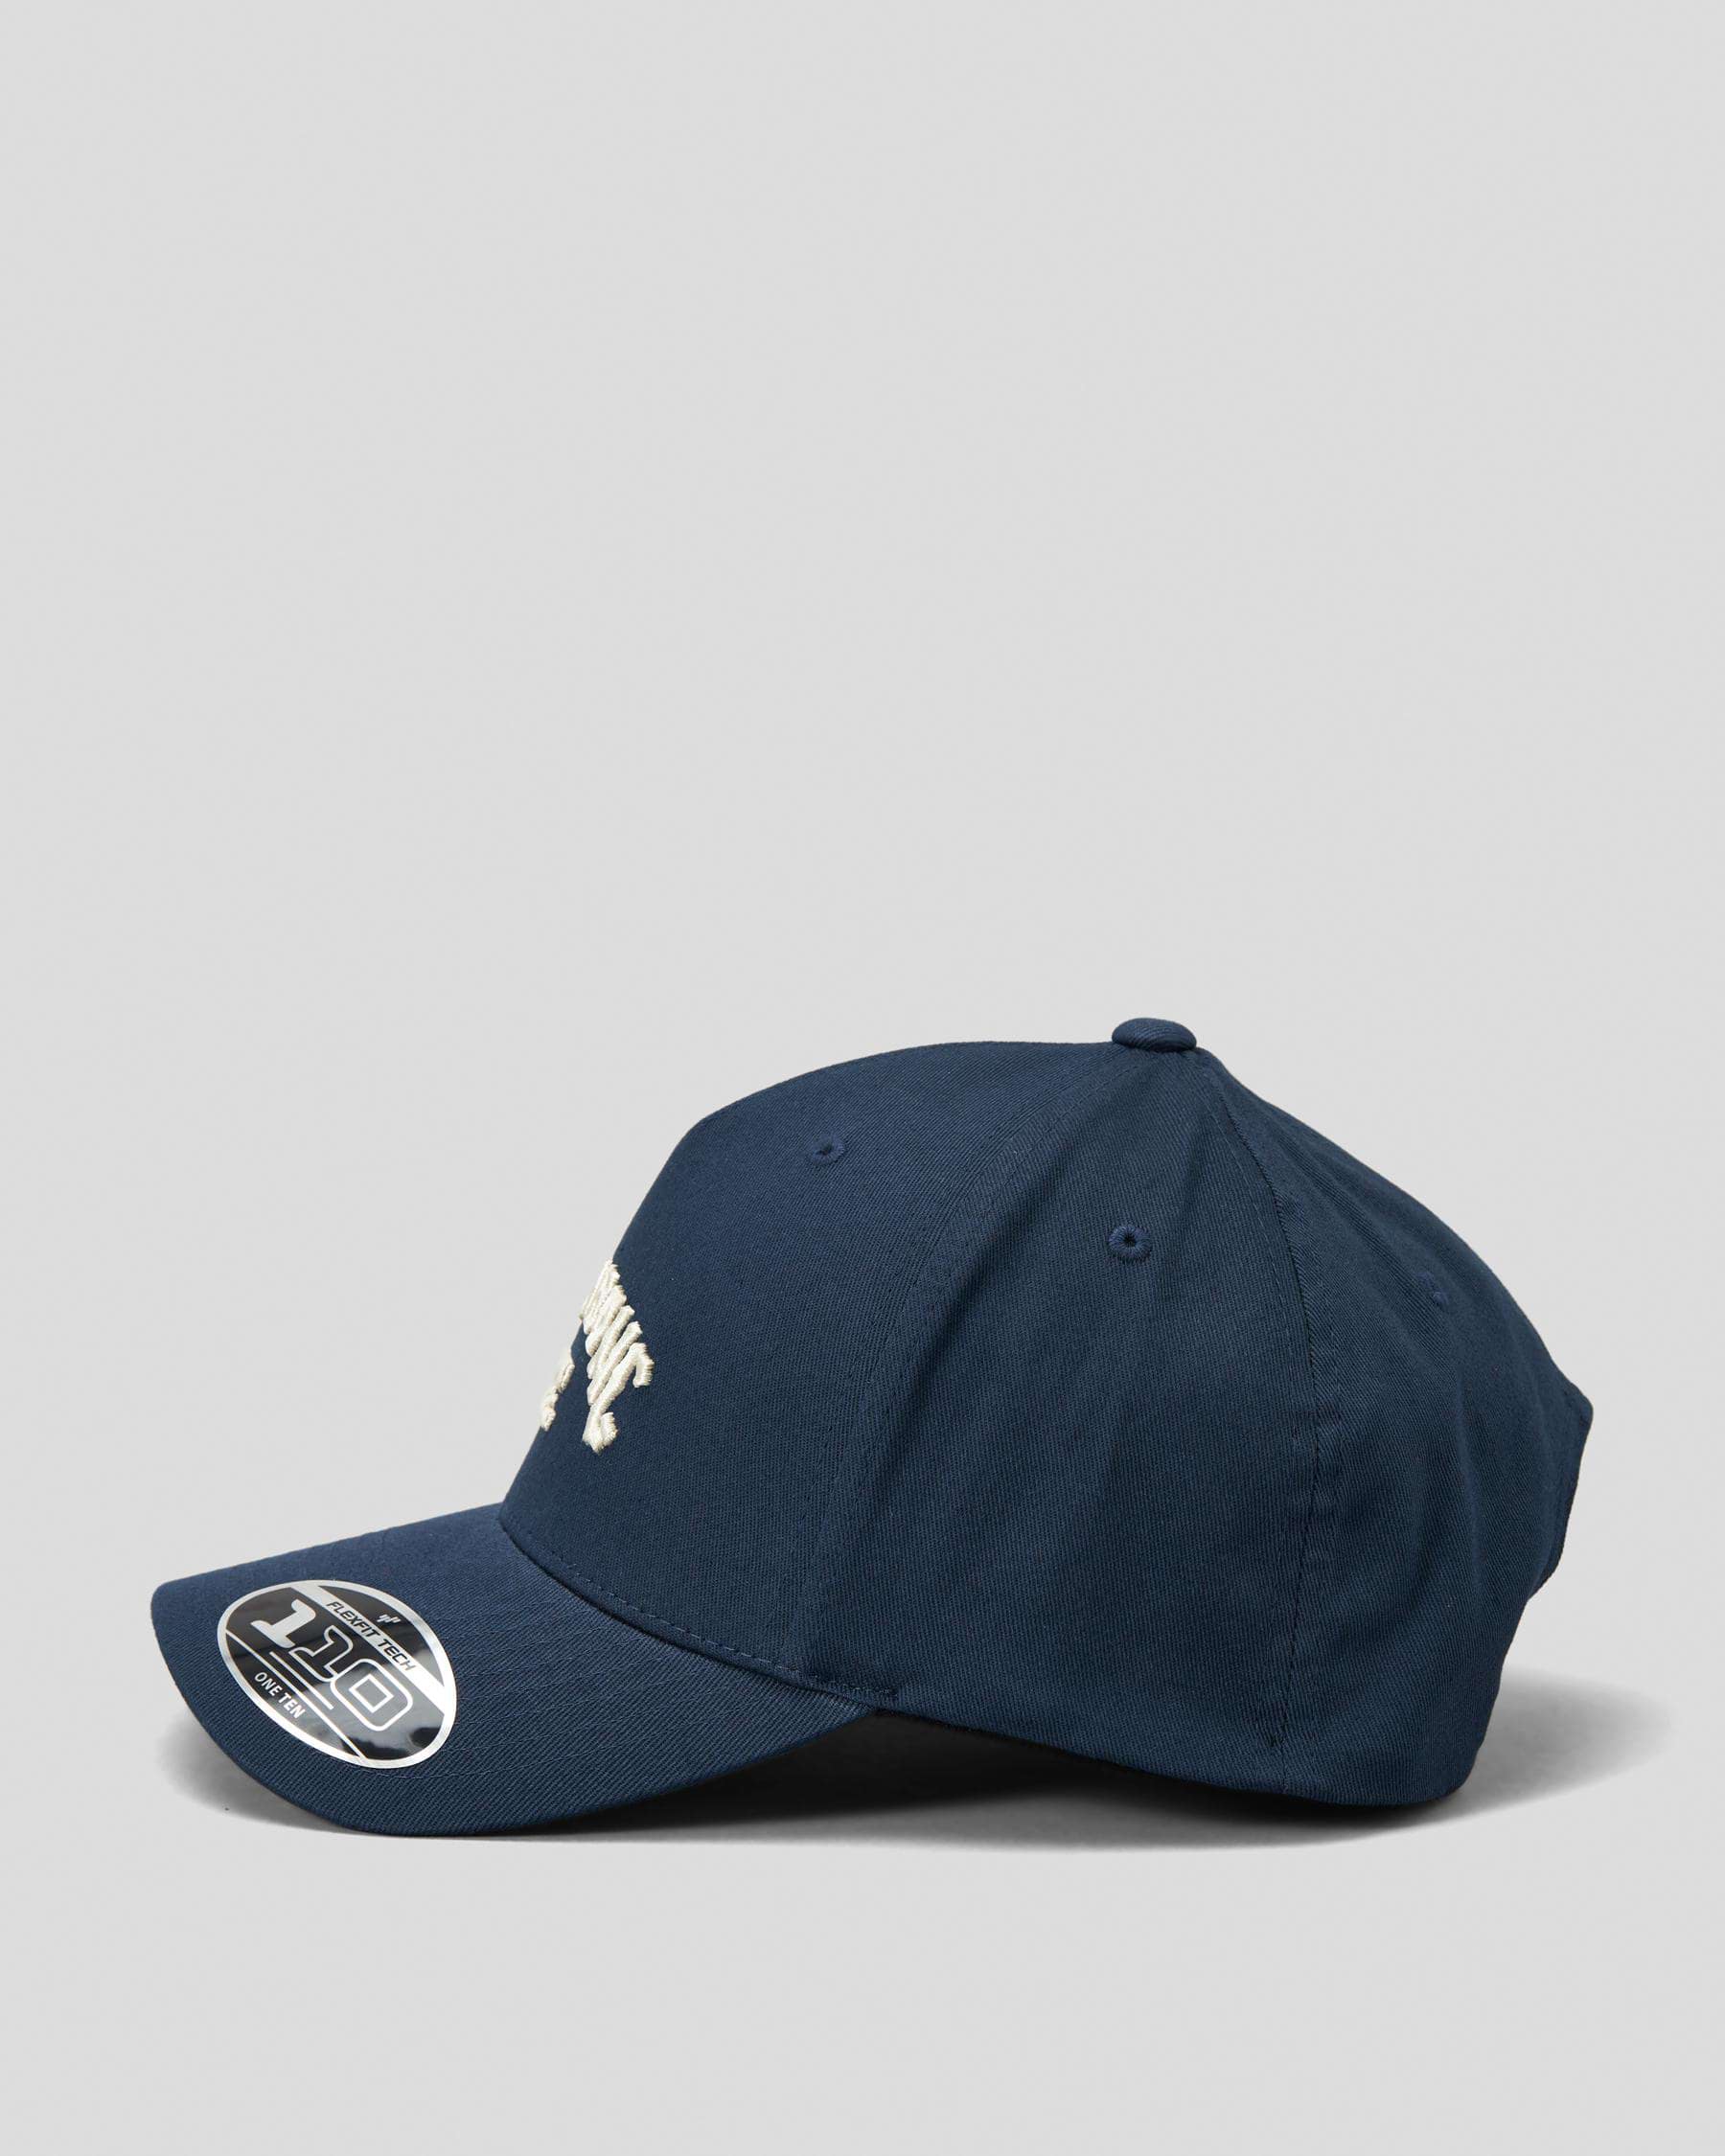 Billabong Arch Flexfit 110 Shipping - City Snapback Returns - Cap Easy Navy In FREE* States & Beach United